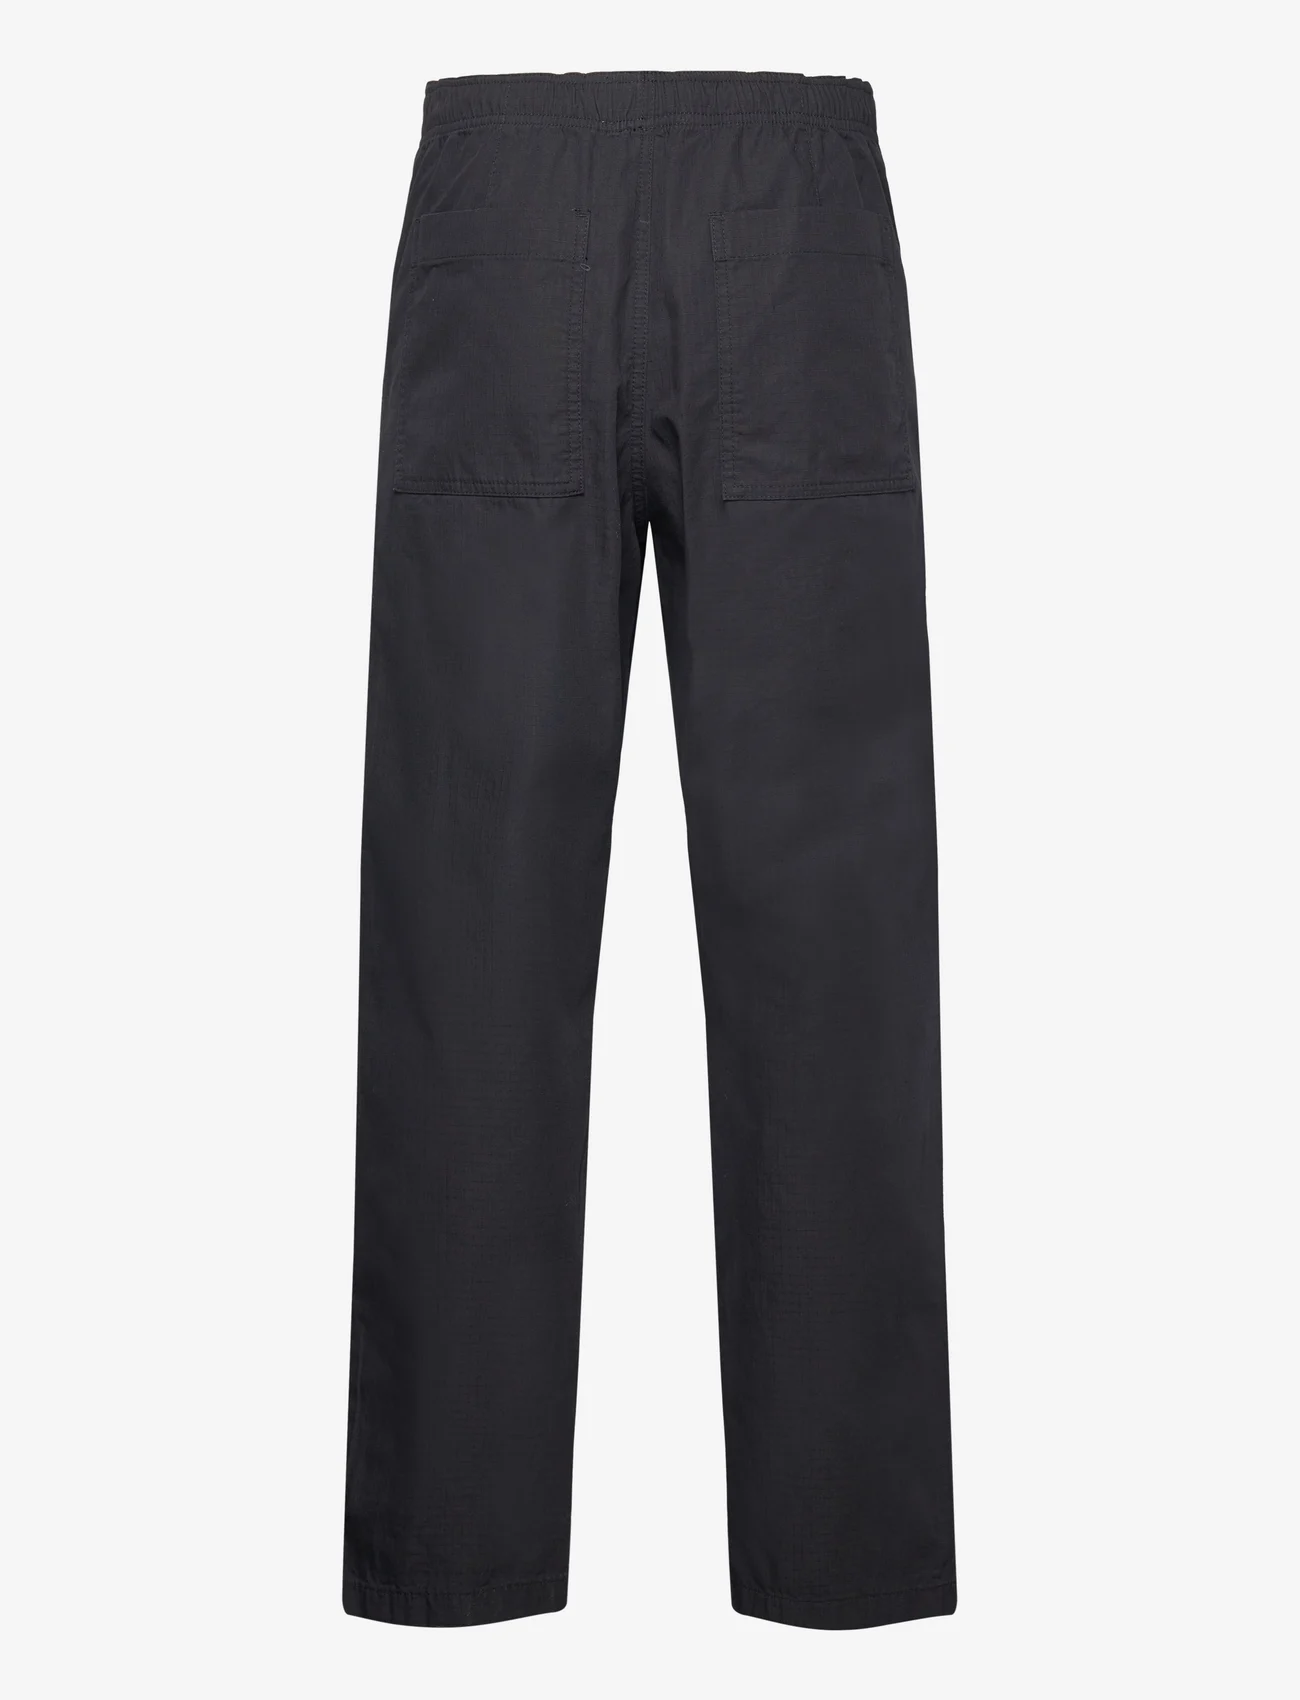 Double A by Wood Wood - Lee ripstop trousers - casual trousers - black - 1